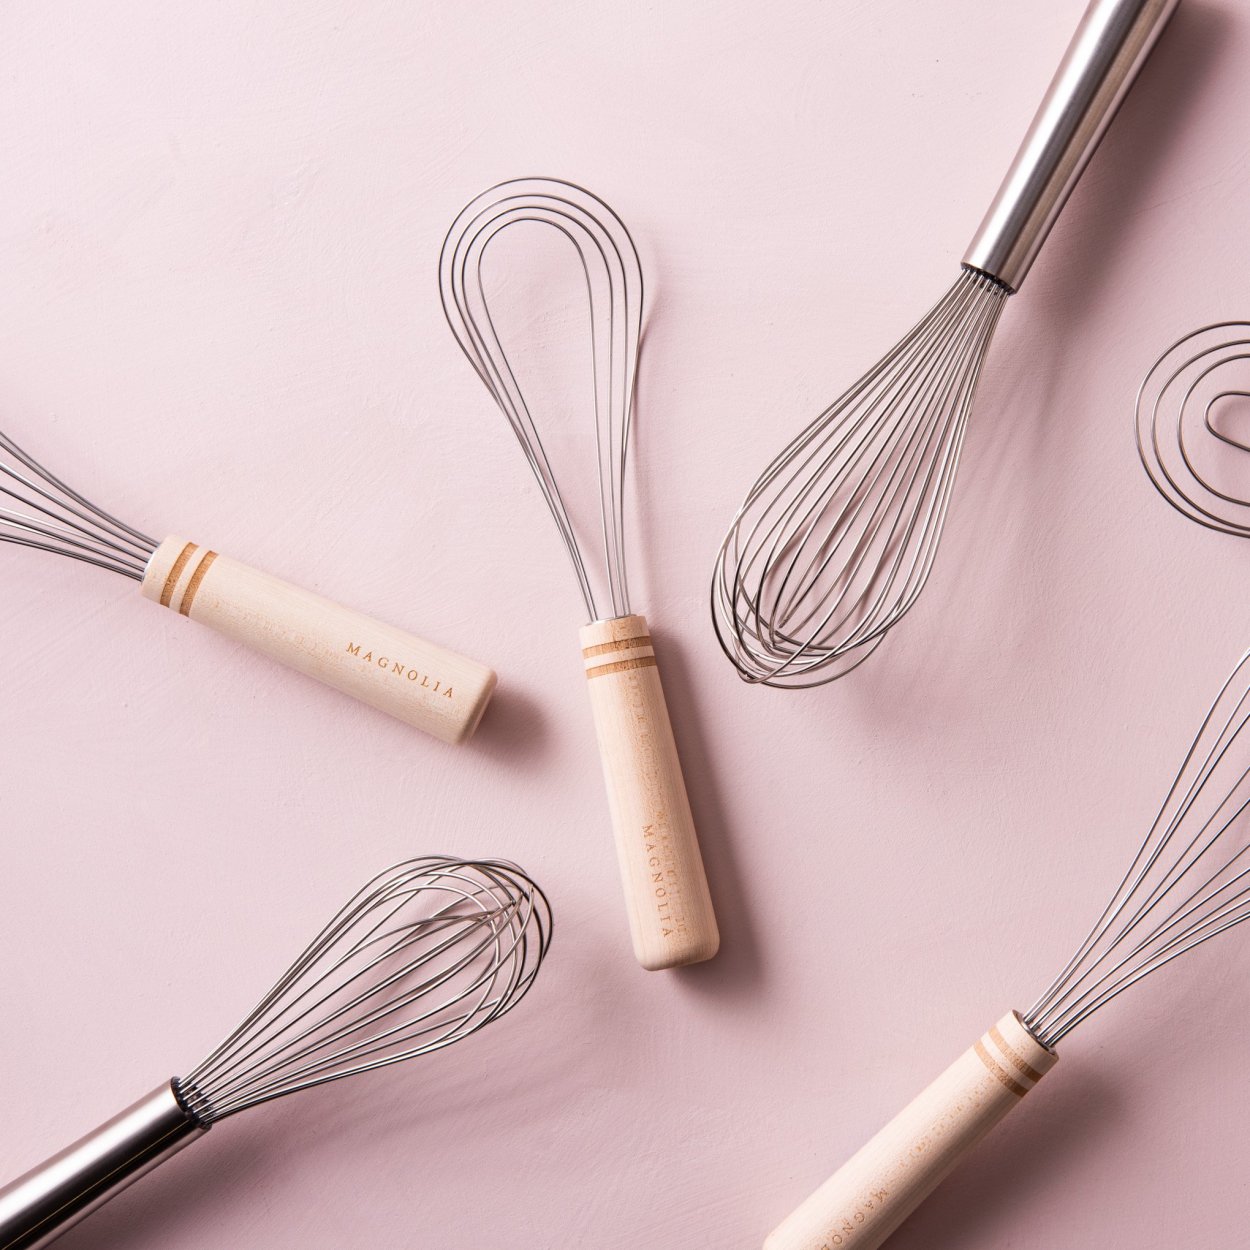 A World of Whisks